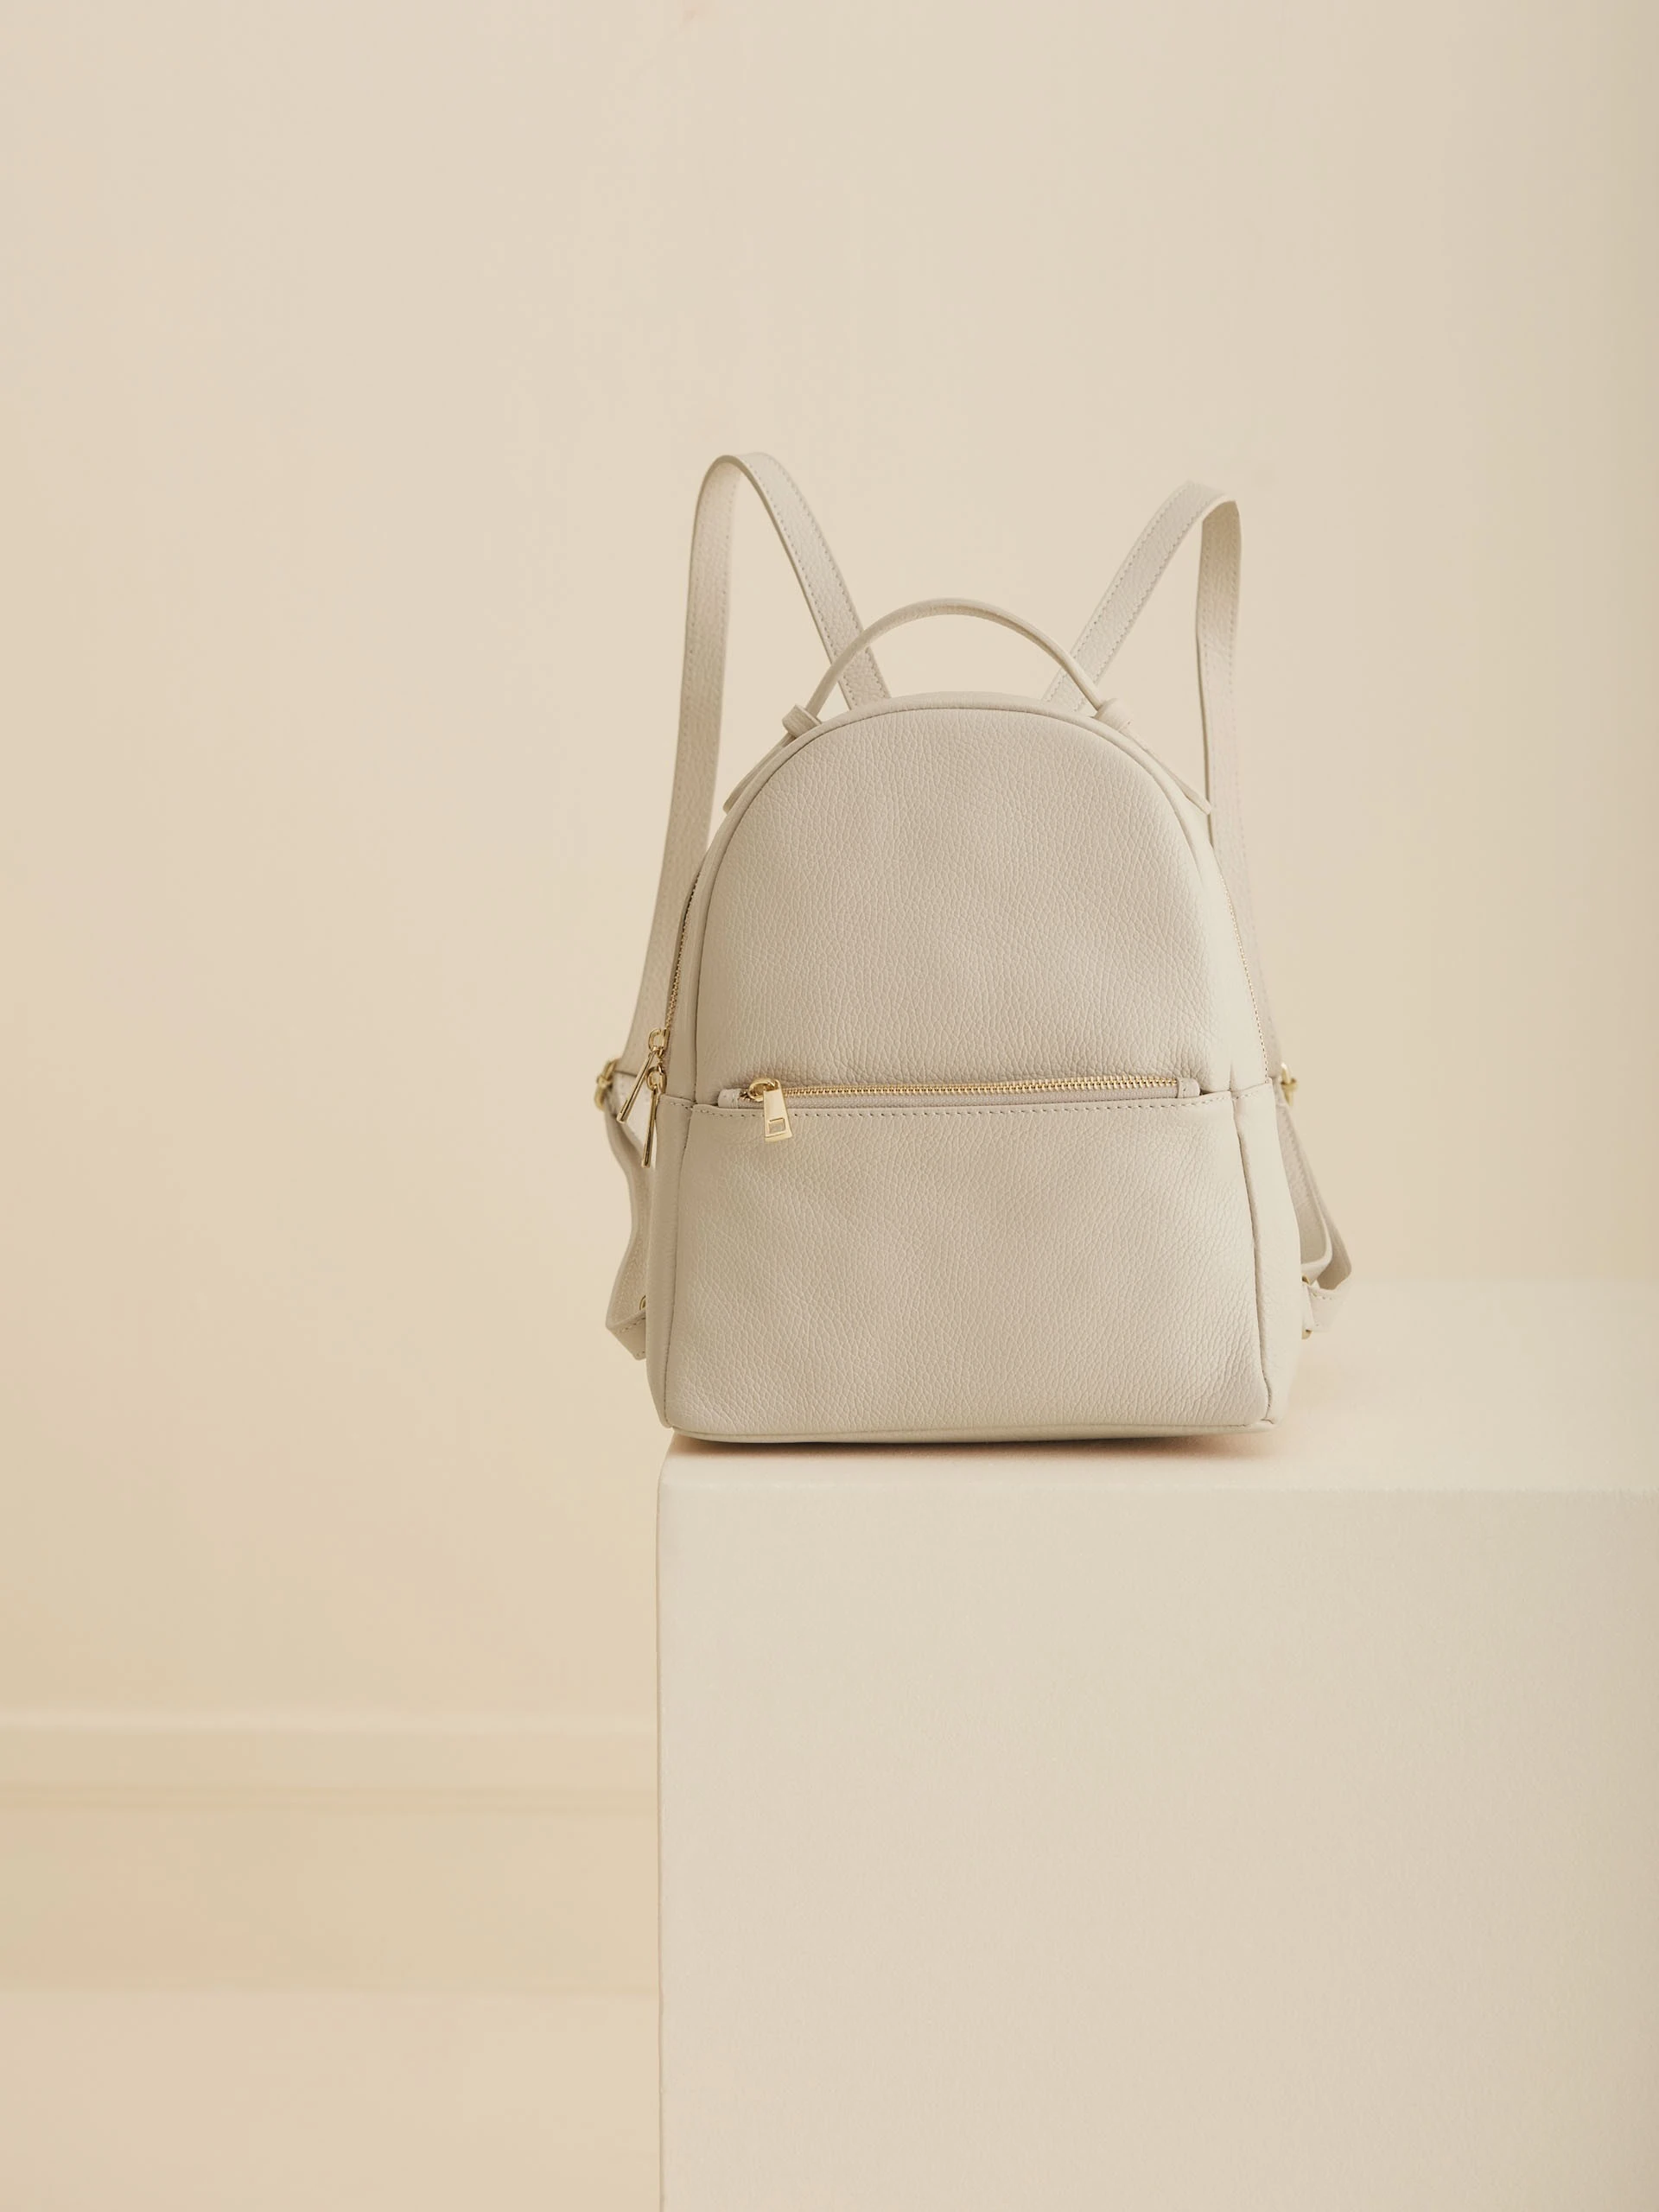 LEATHER CREAM BACKPACK